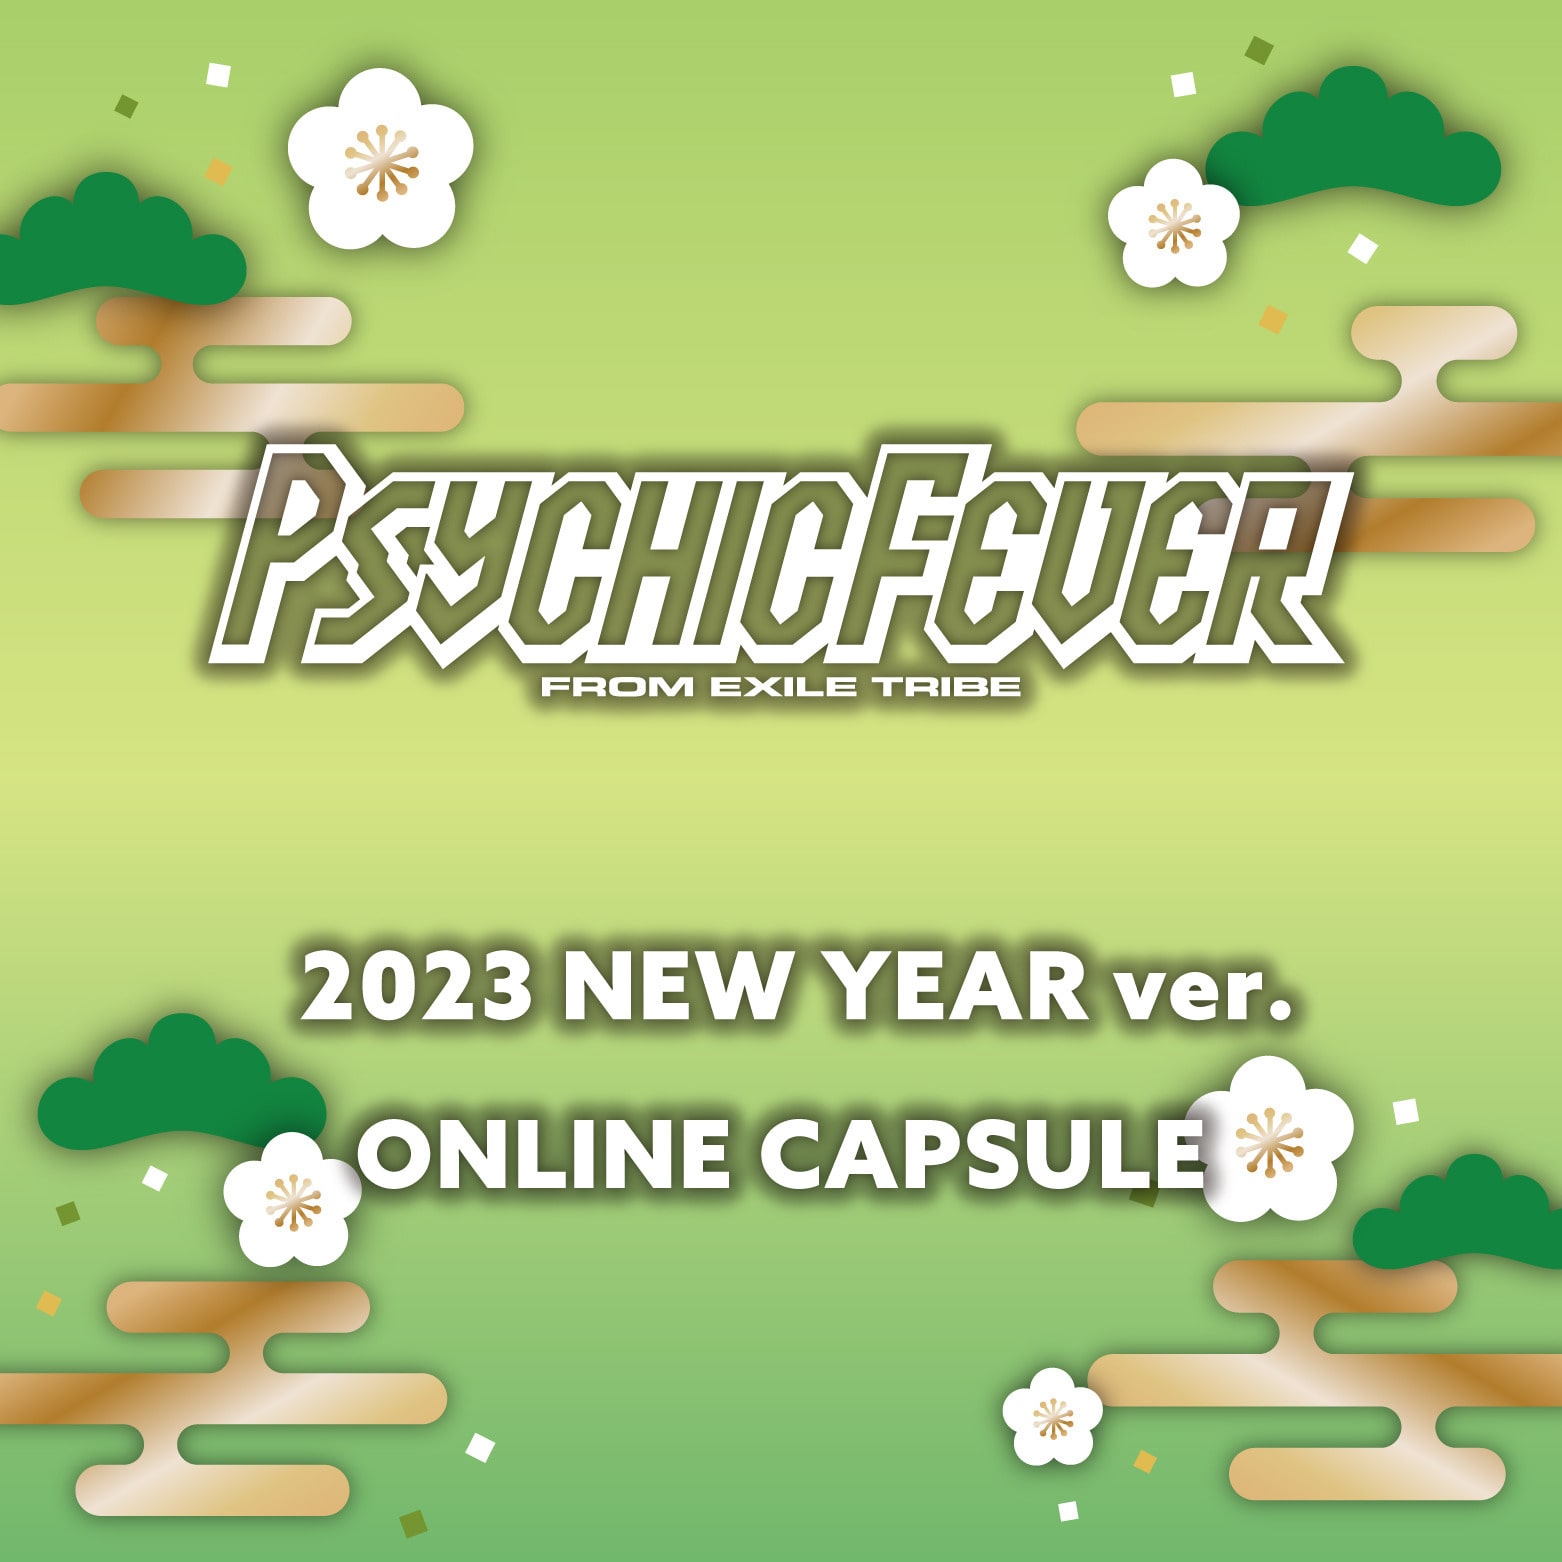 PSYCHIC FEVER 2023 NEW YEAR